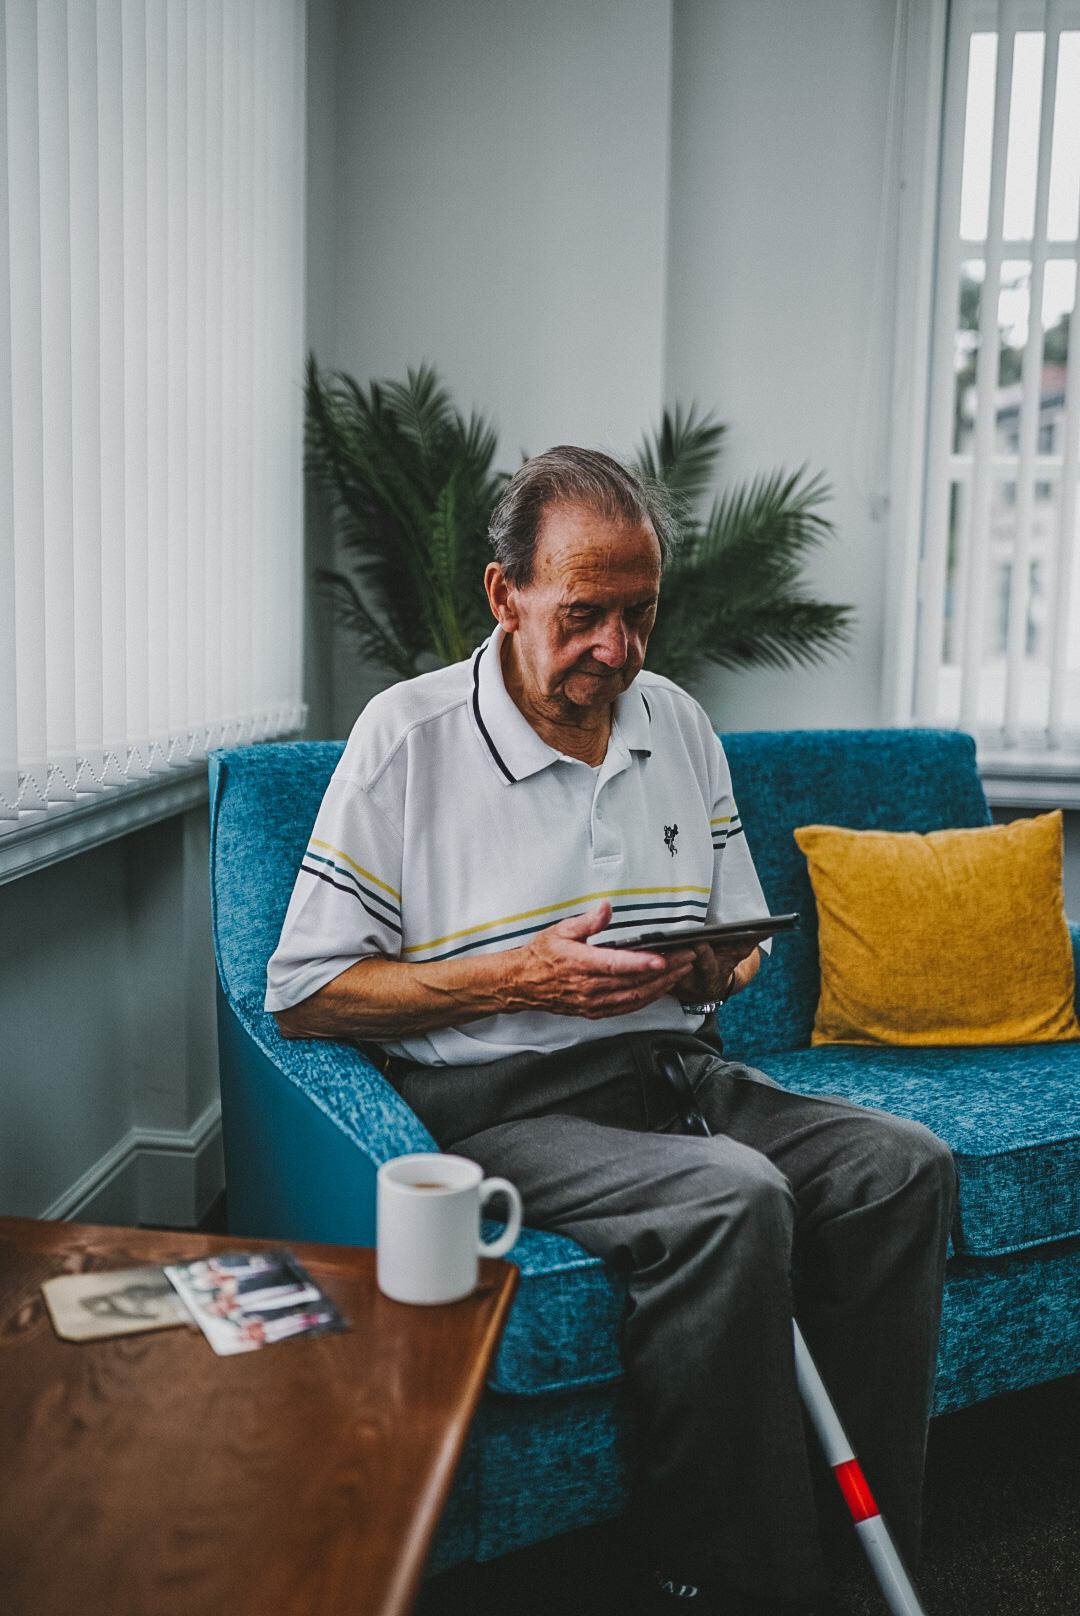 Blind veteran fred using a tablet